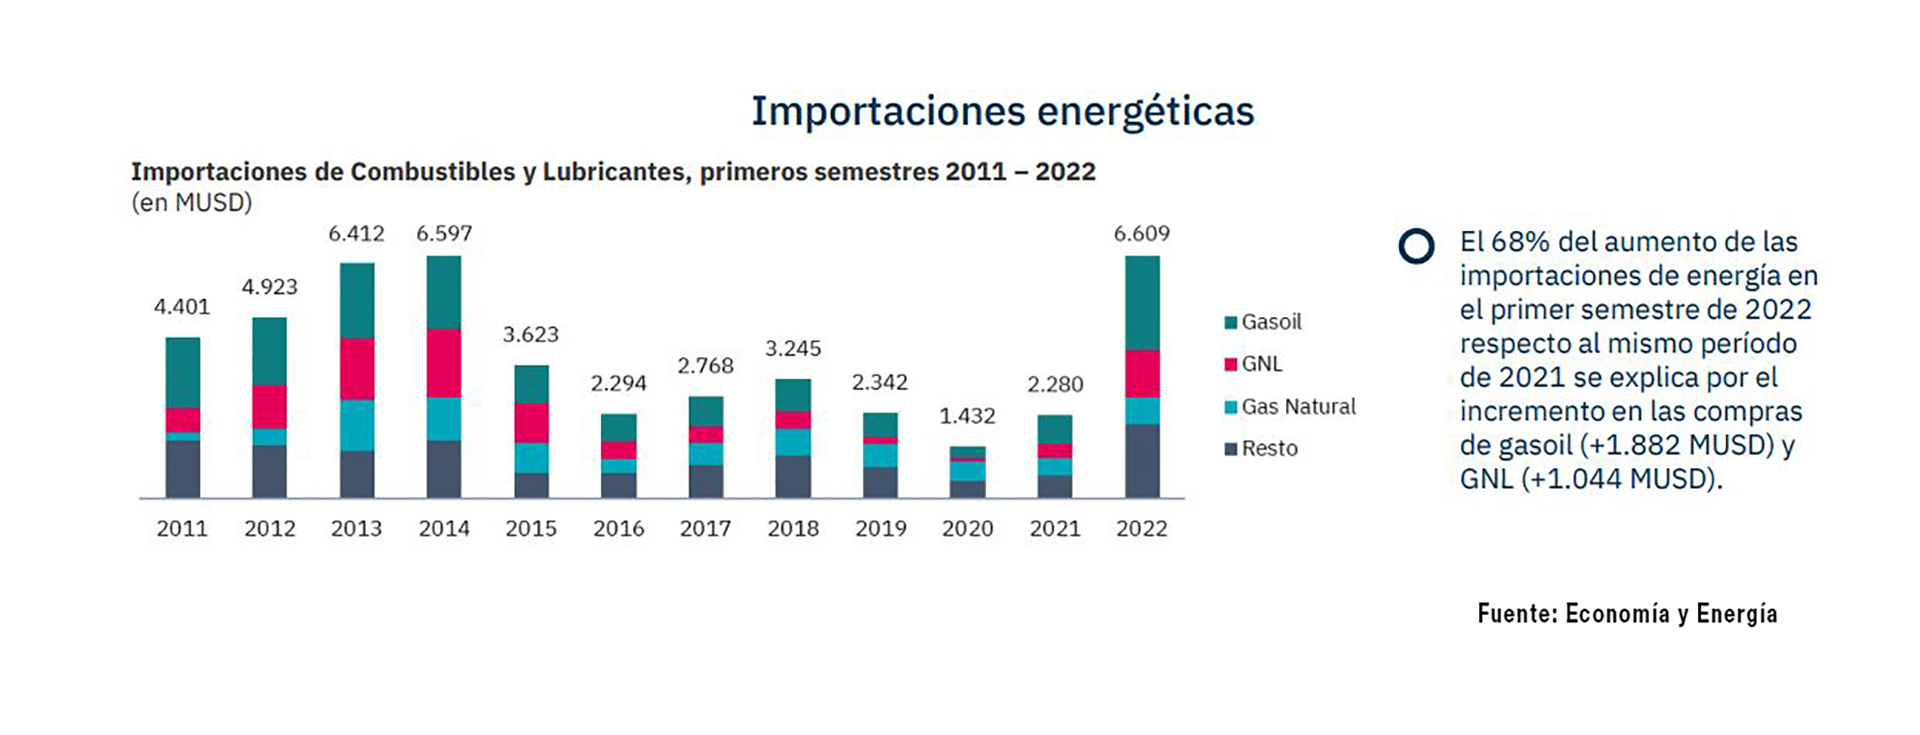 Argentine energy imports in the first half of the year